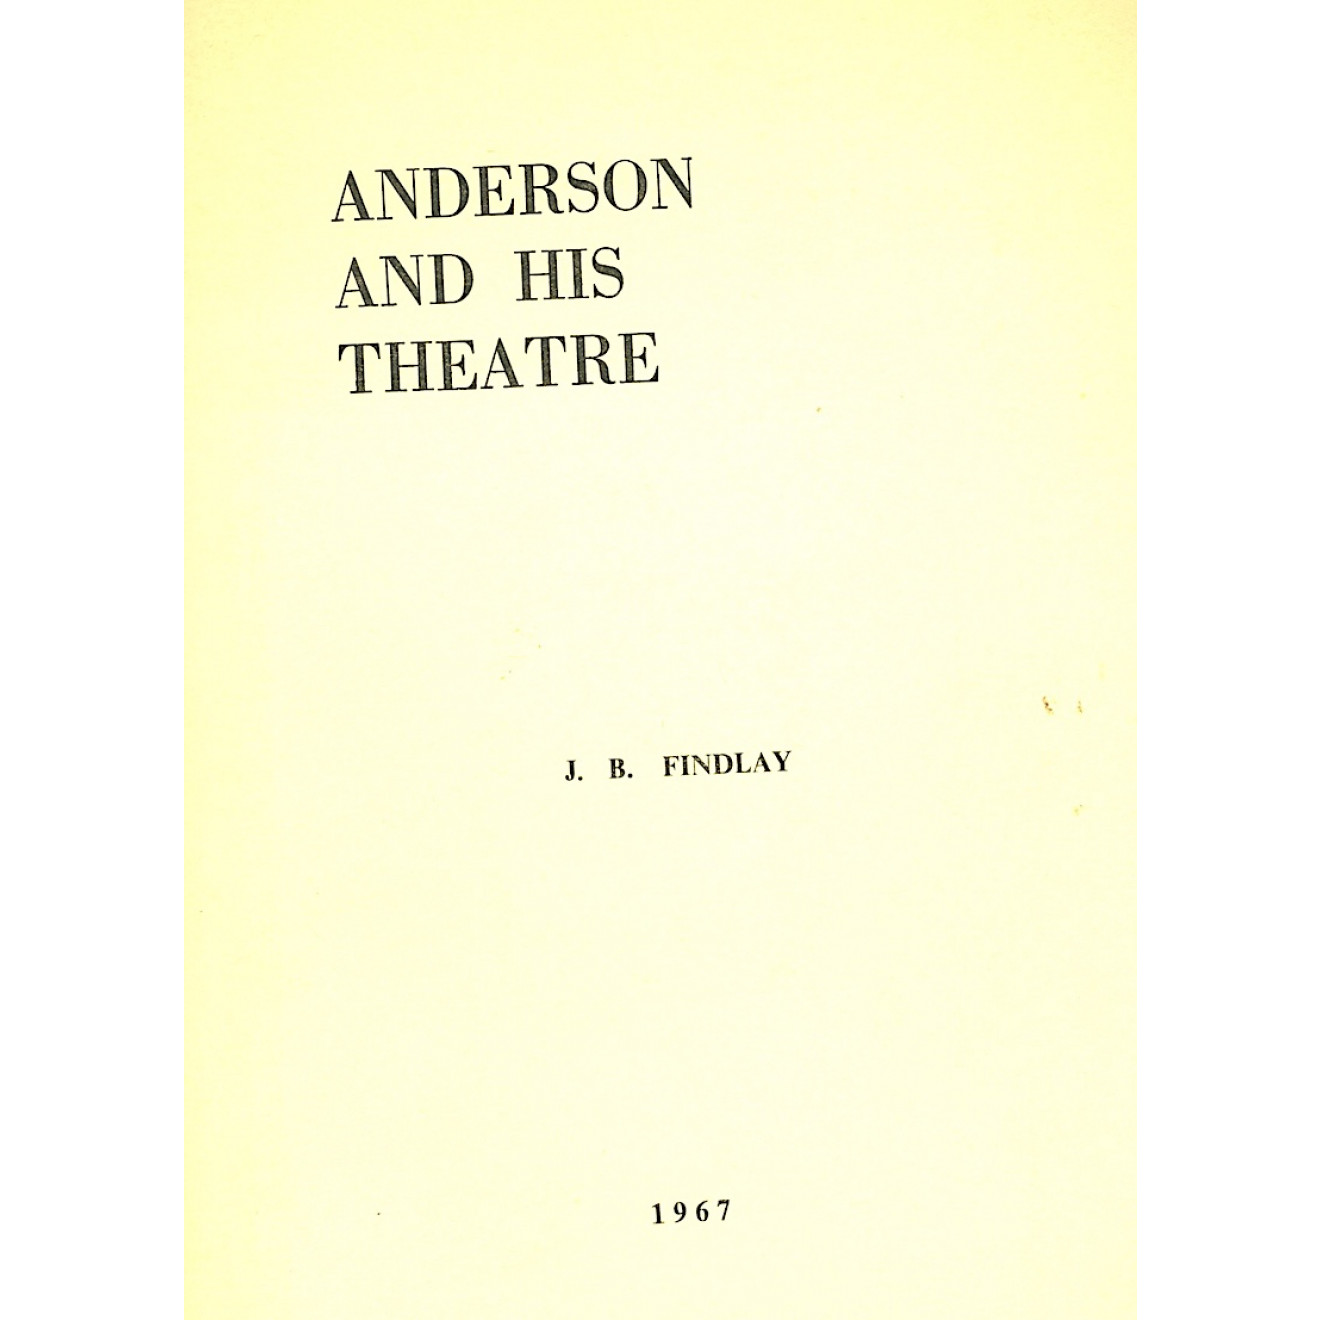 Anderson and His Theatre